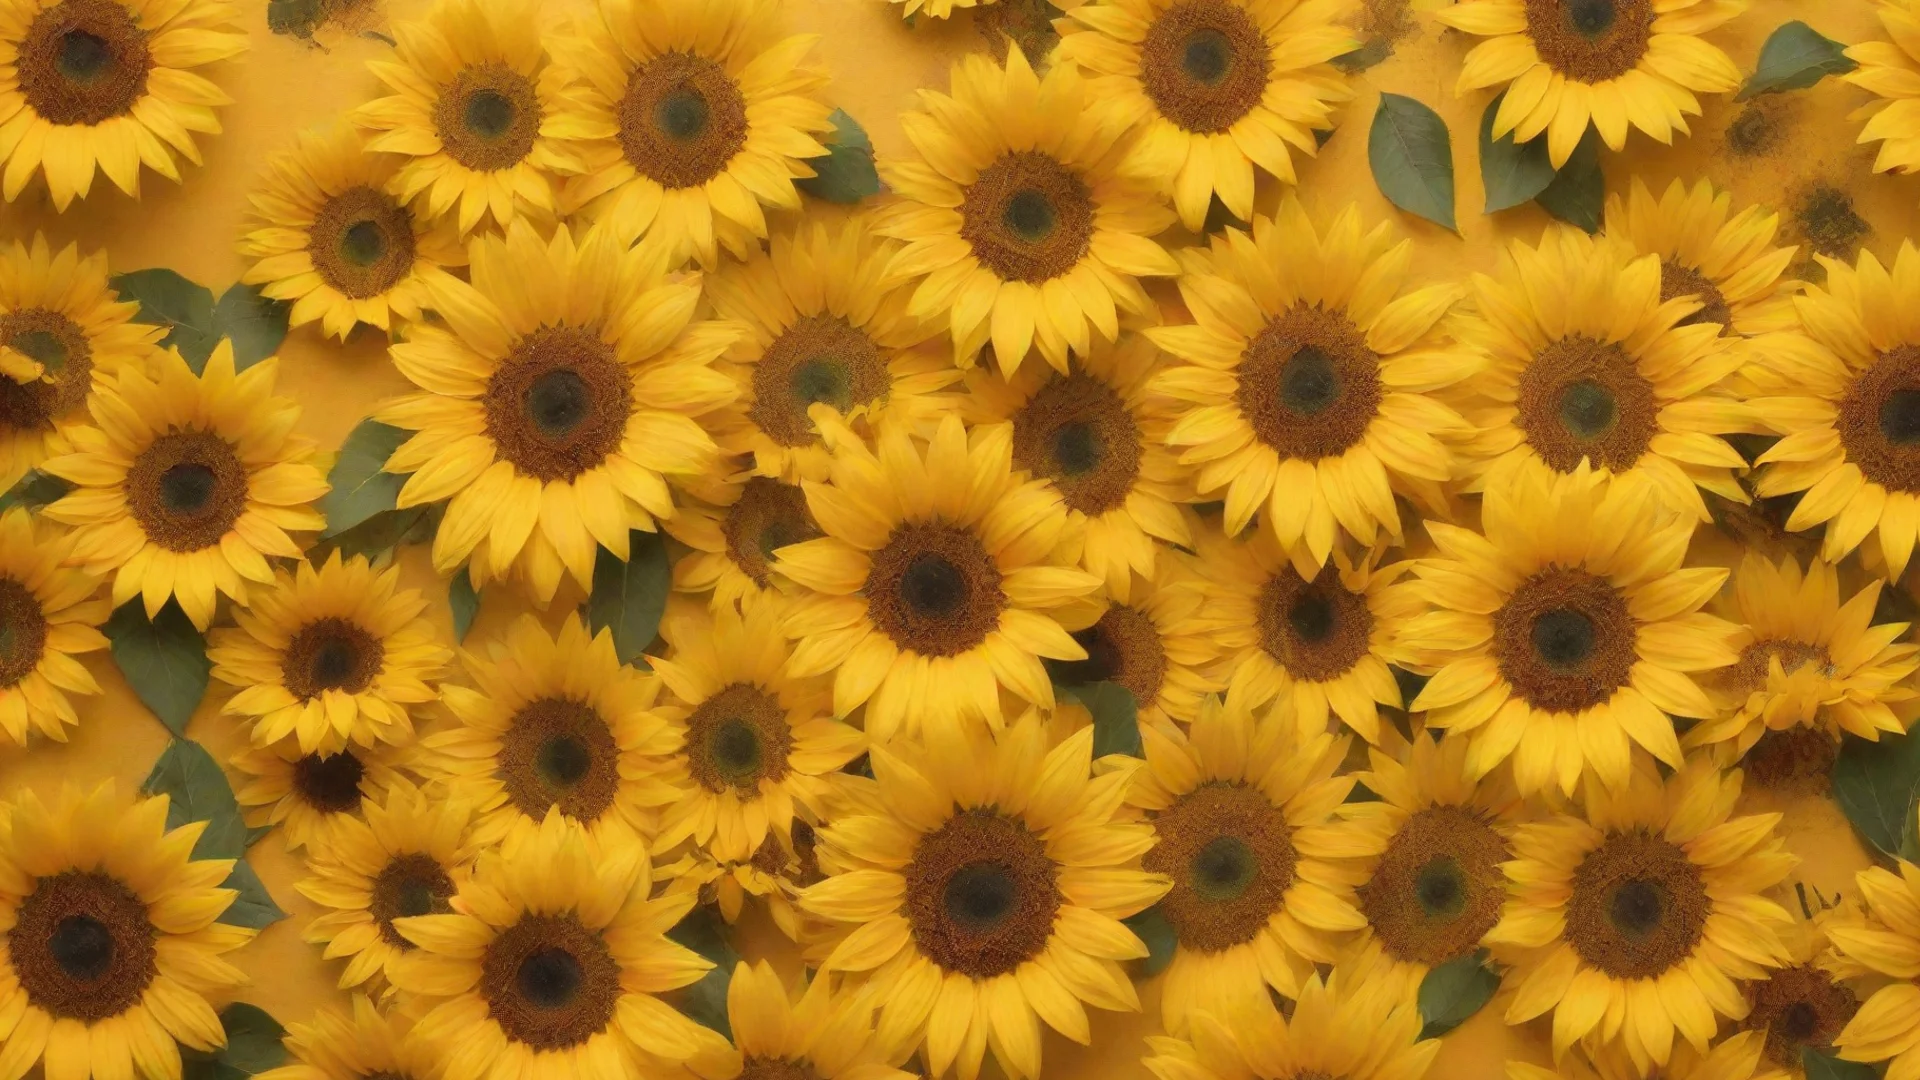 swirling yellow background with sunflowers strewn about wide